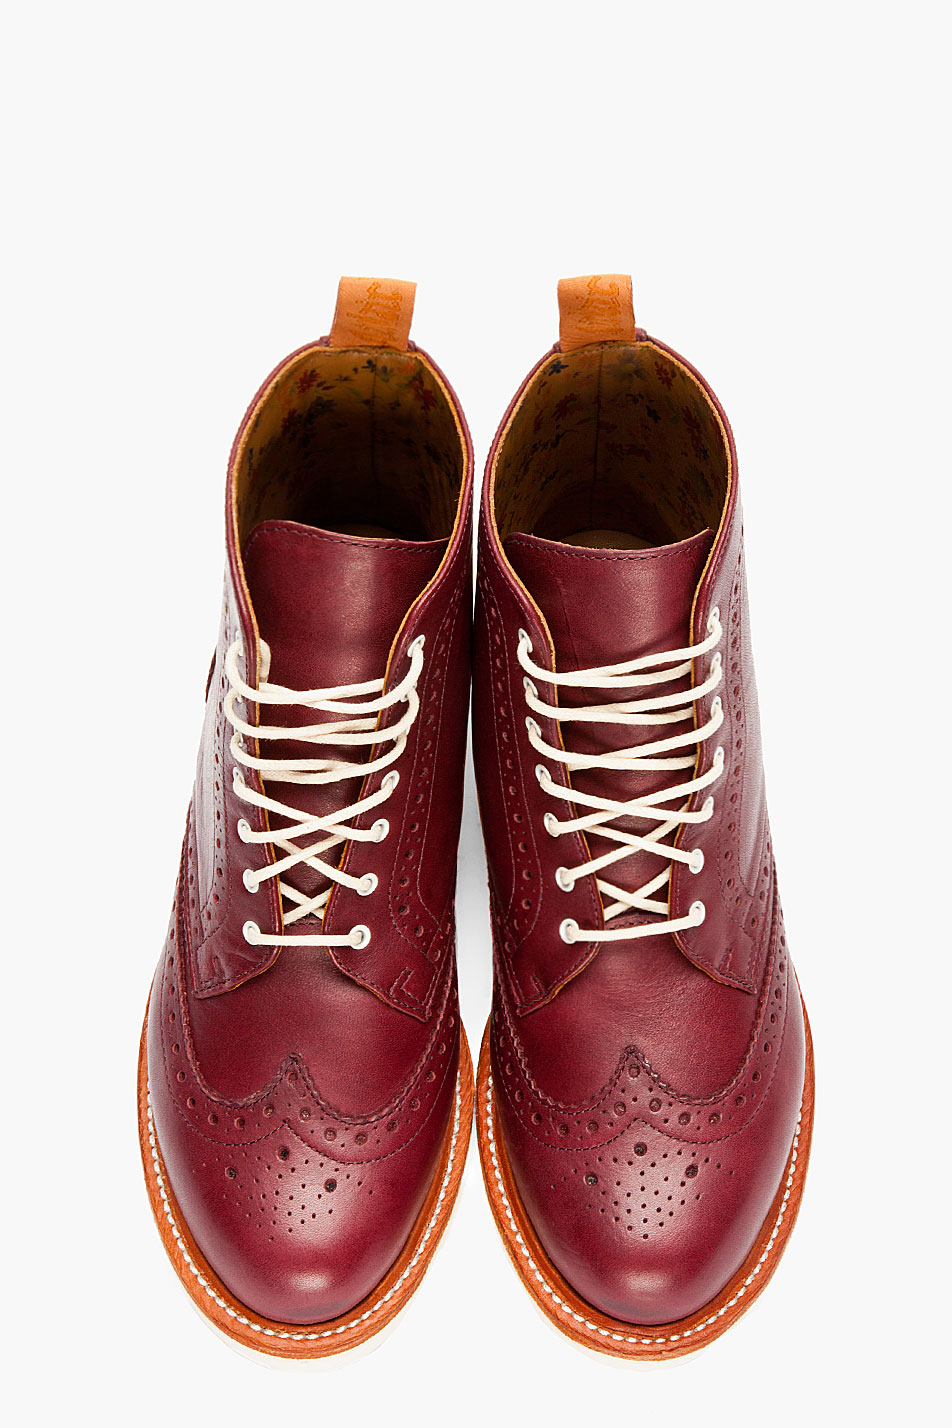 Dr. Martens Burgundy Leather Bentley Wingtip Brogue Boots in Red | Lyst